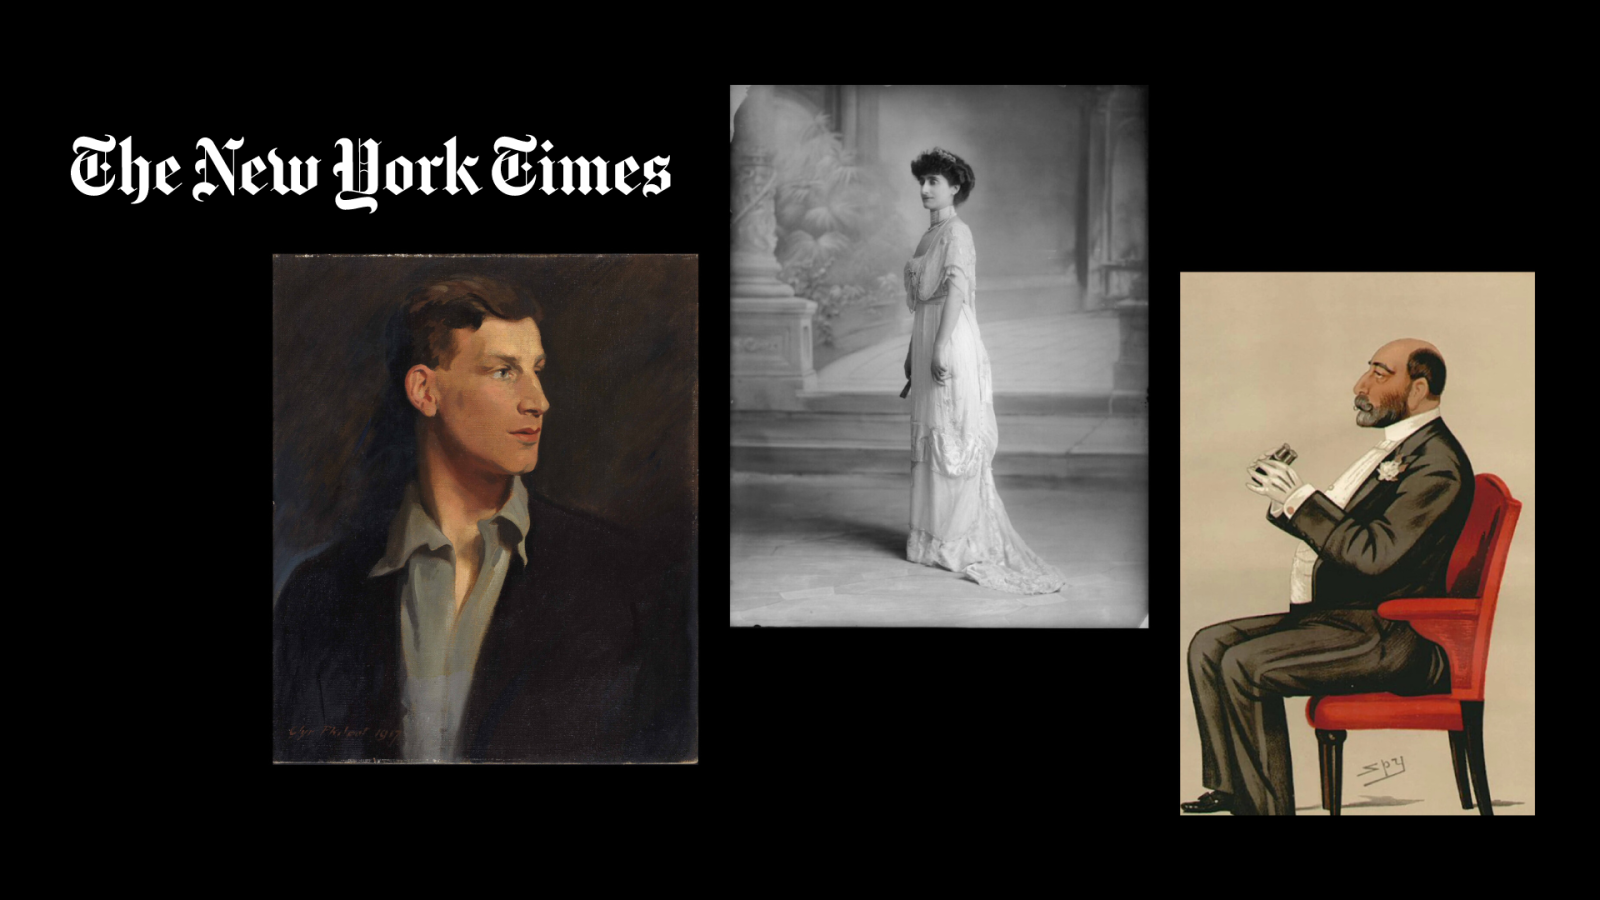 Three portrait paintings overset with the New York Times logo